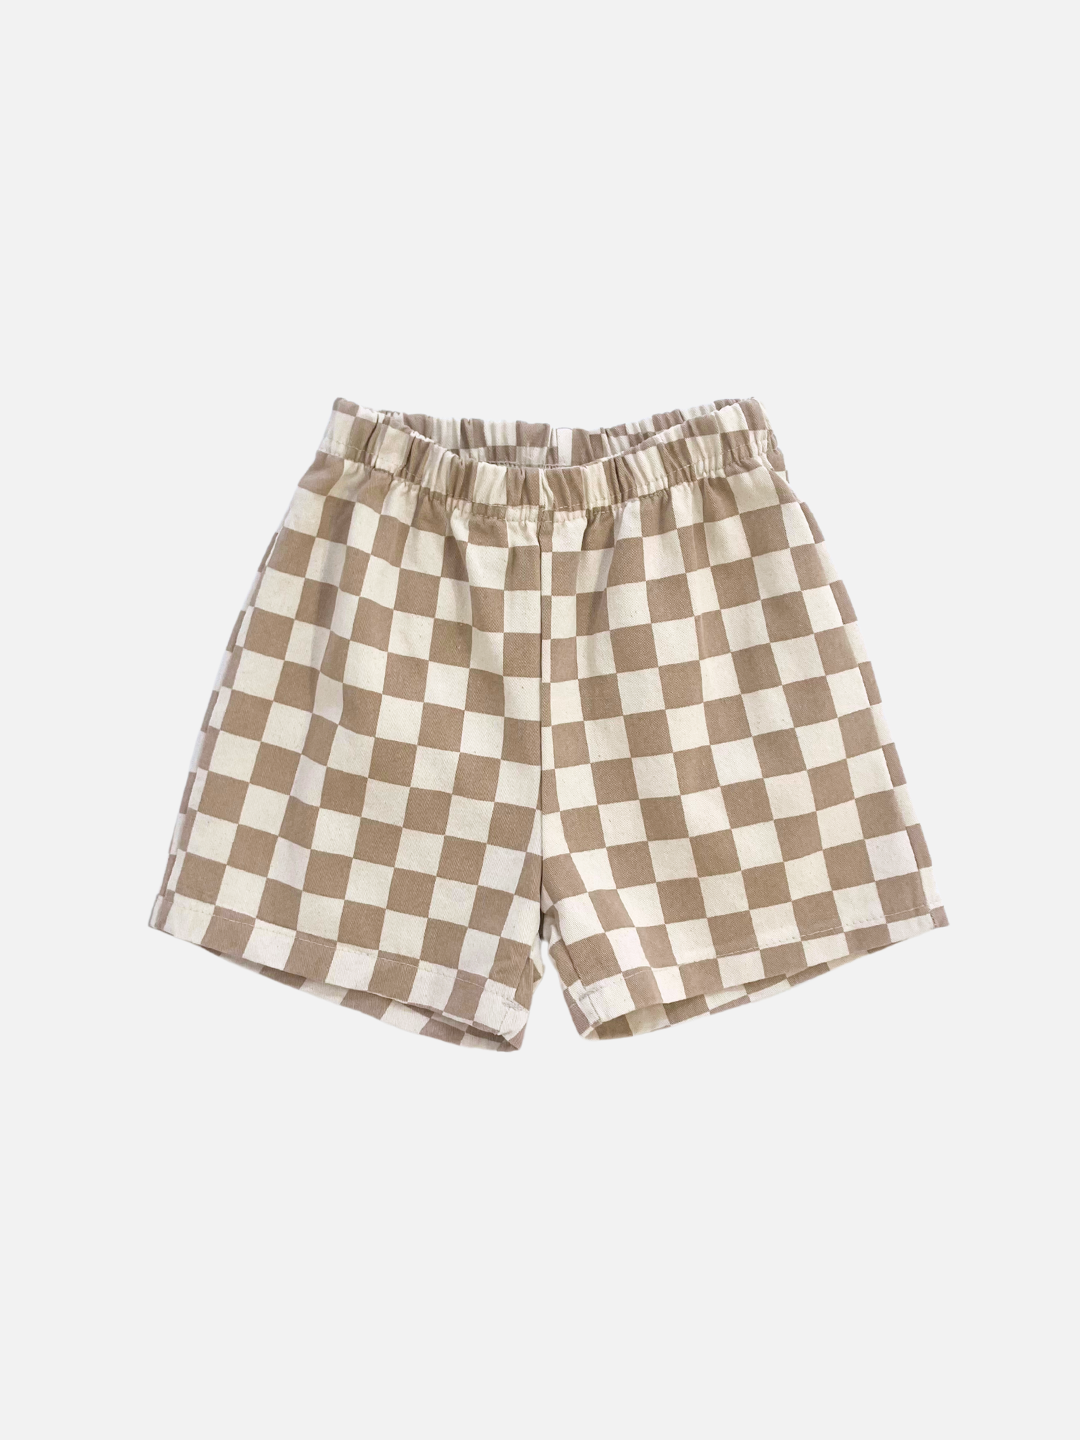 A front view of the kid's Frankie Short in Tan & Ivory check